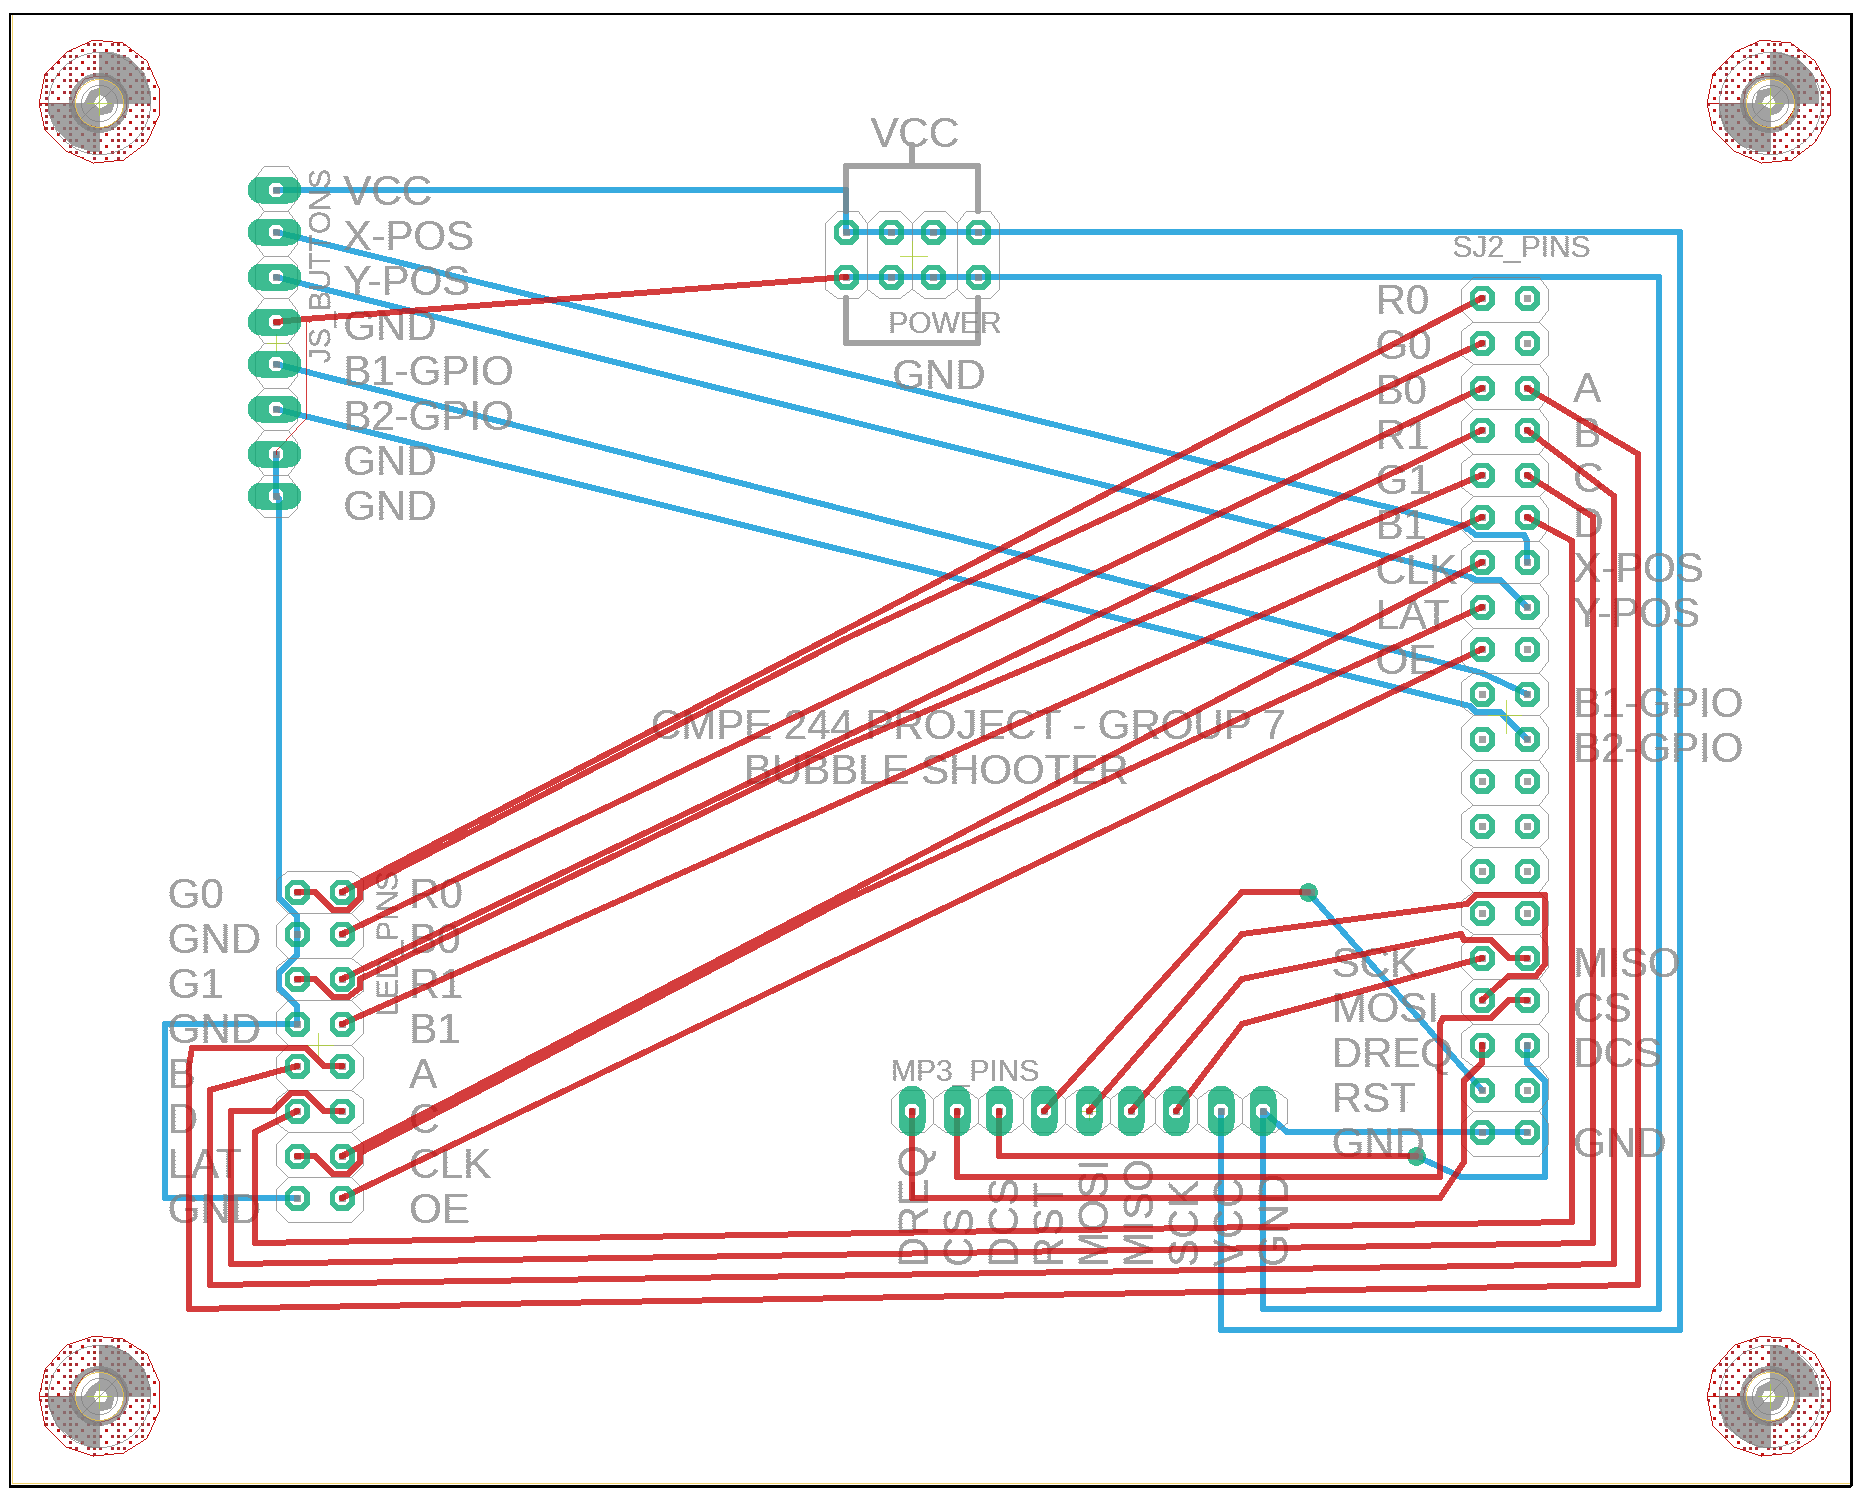 PCB Board Overview.PNG